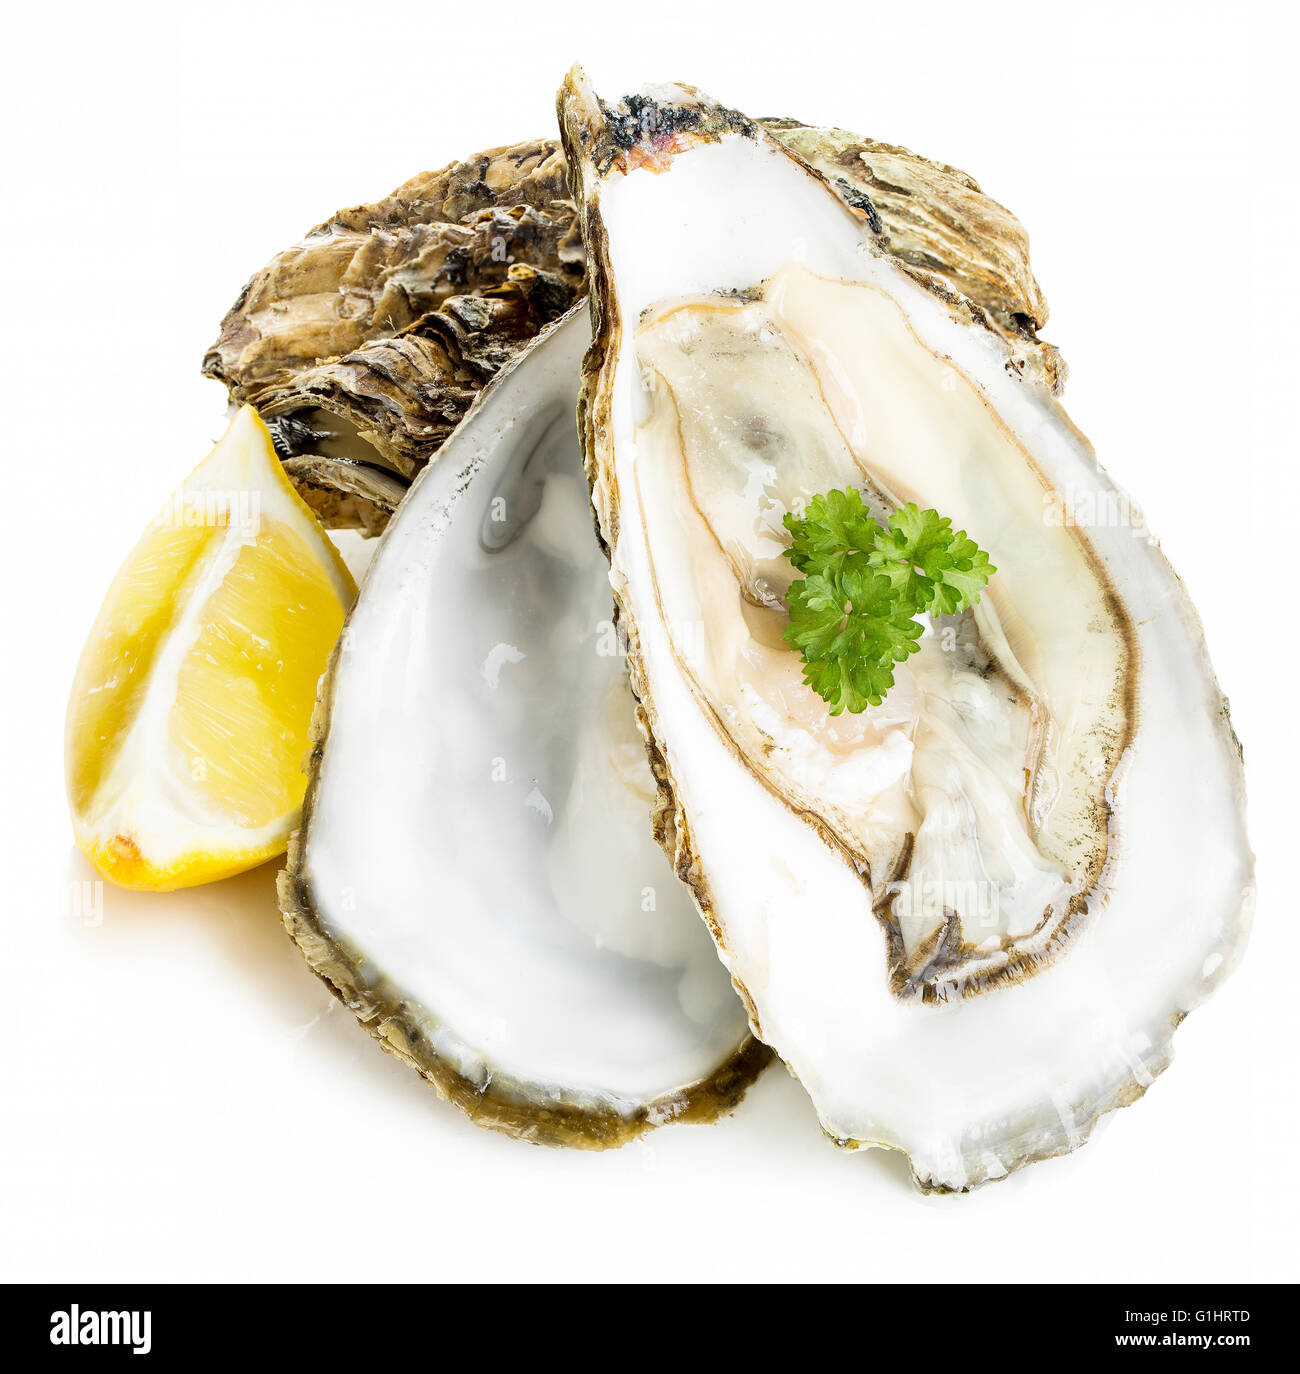 Oysters with lemon and parsley close-up isolated on a white background. Seafood. Stock Photo